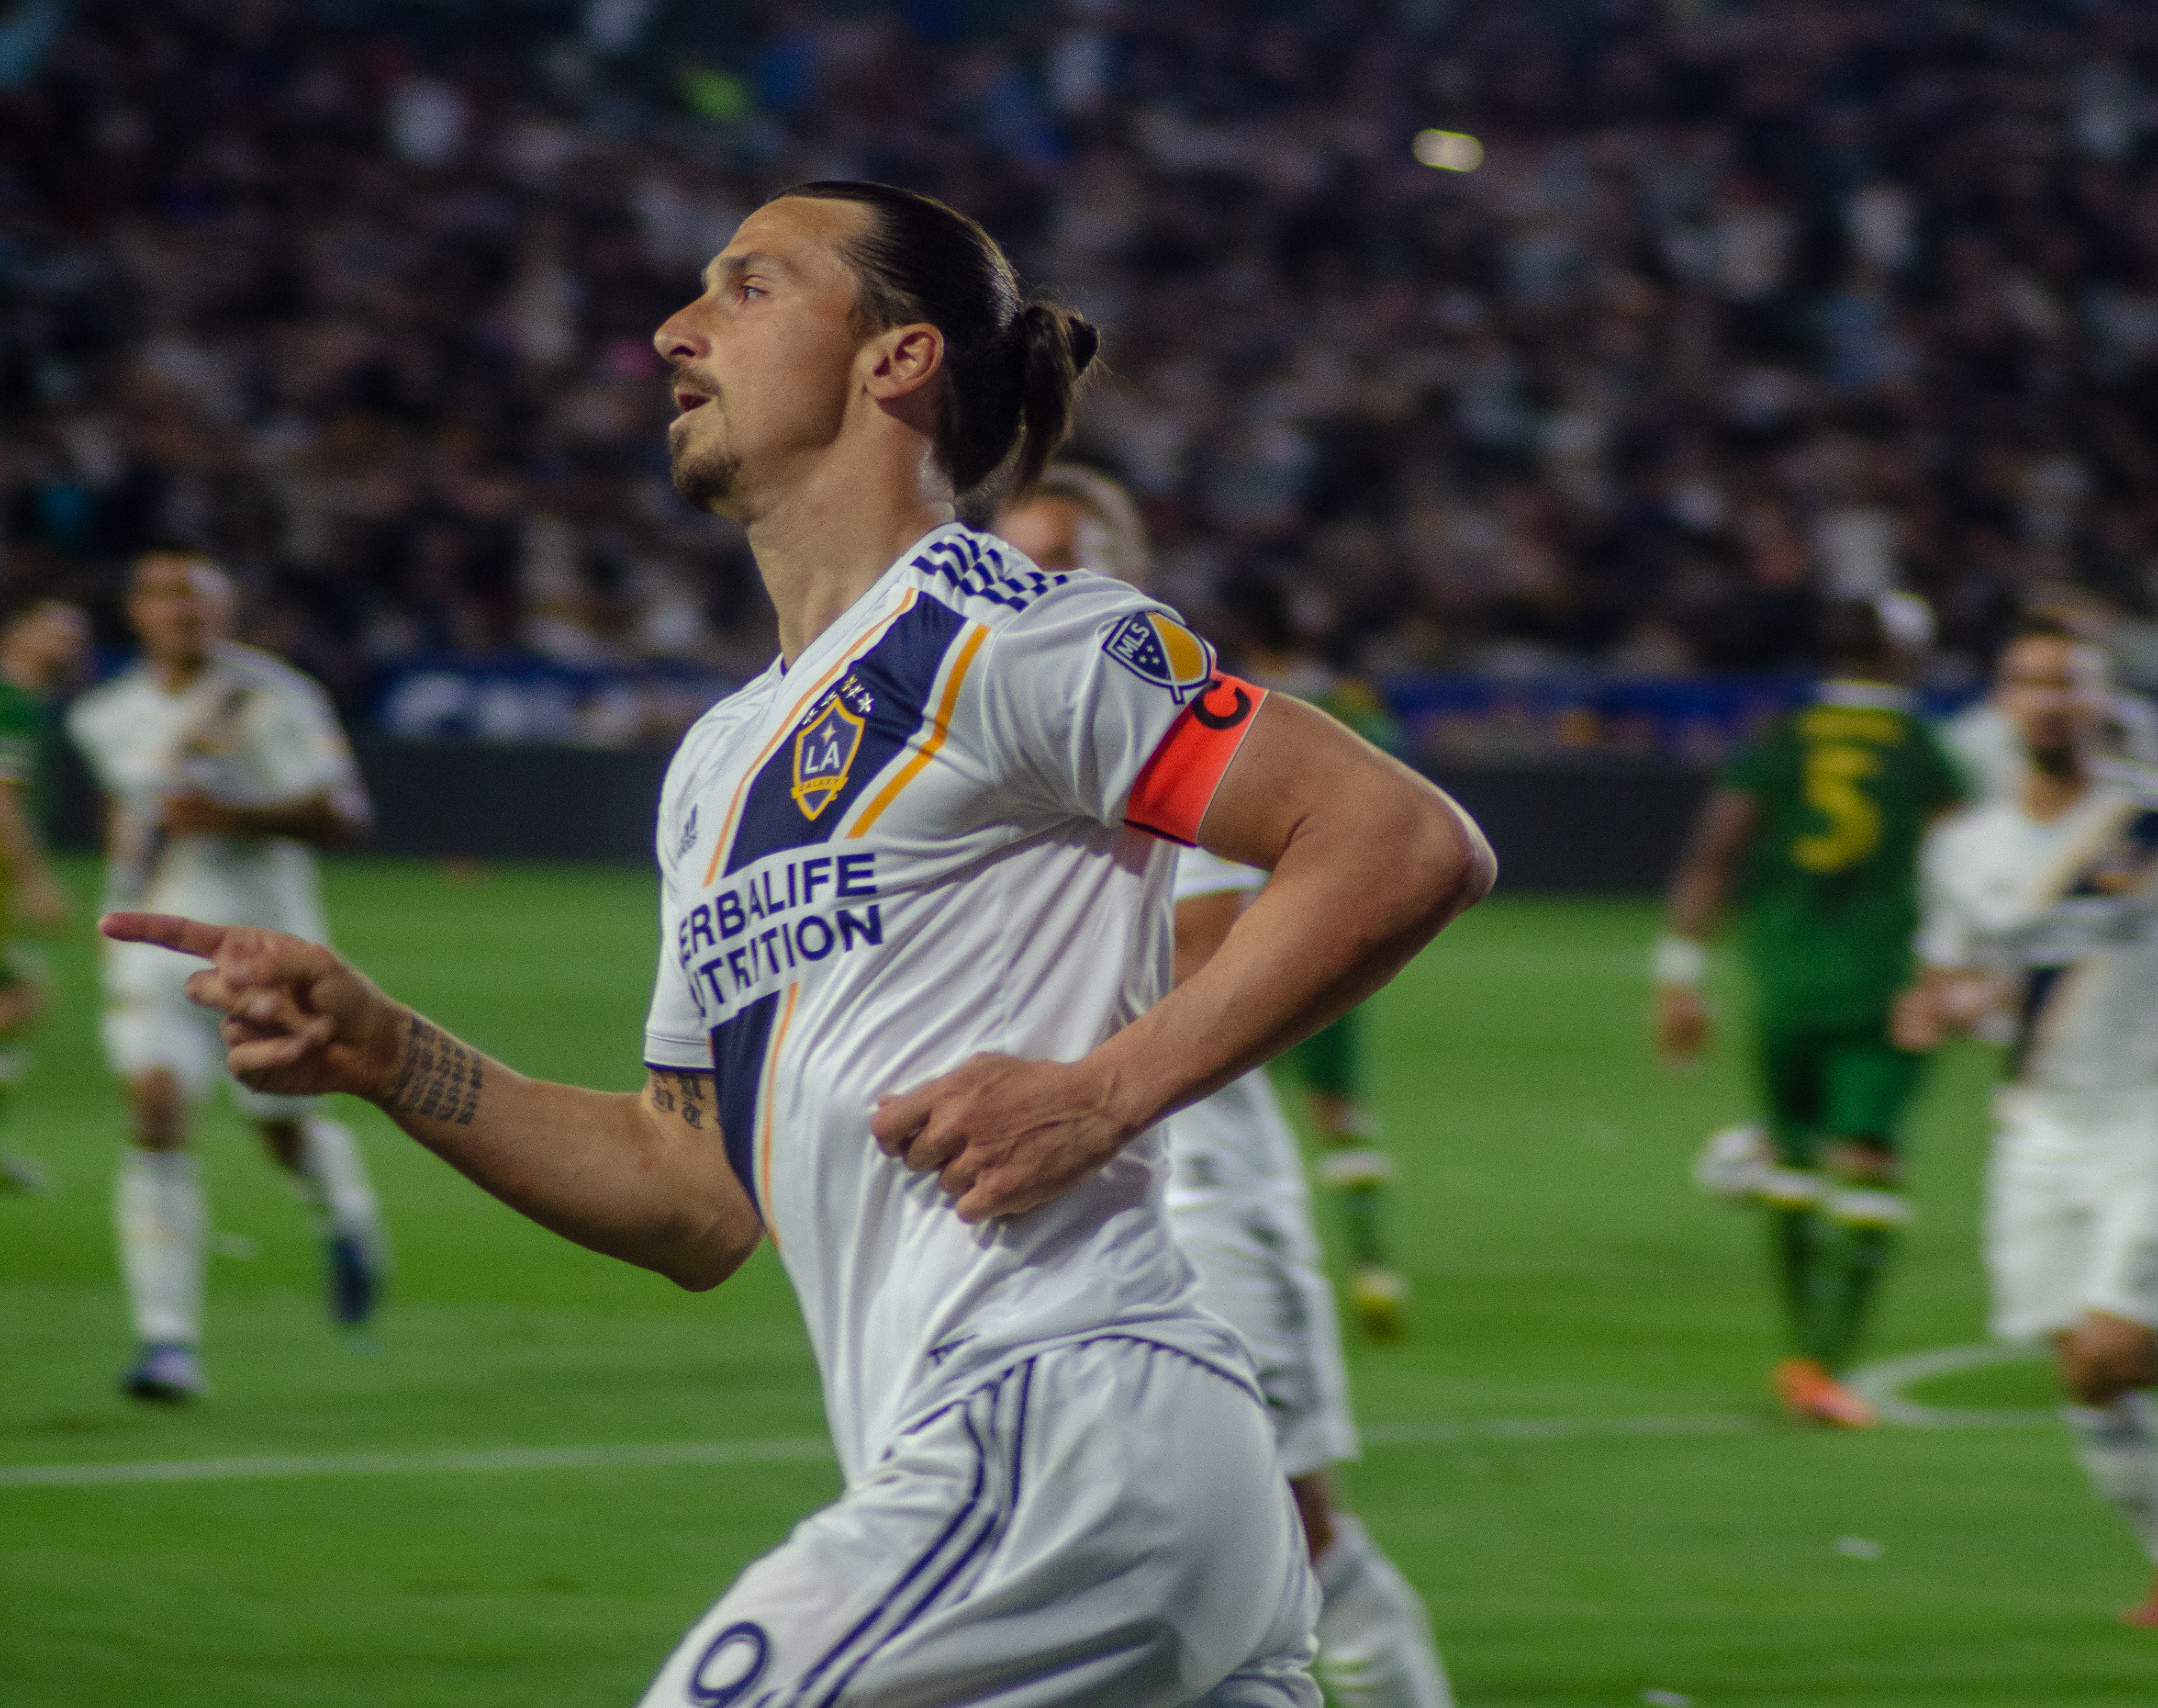 Where are the Firefighters? Zlatan is on Fire